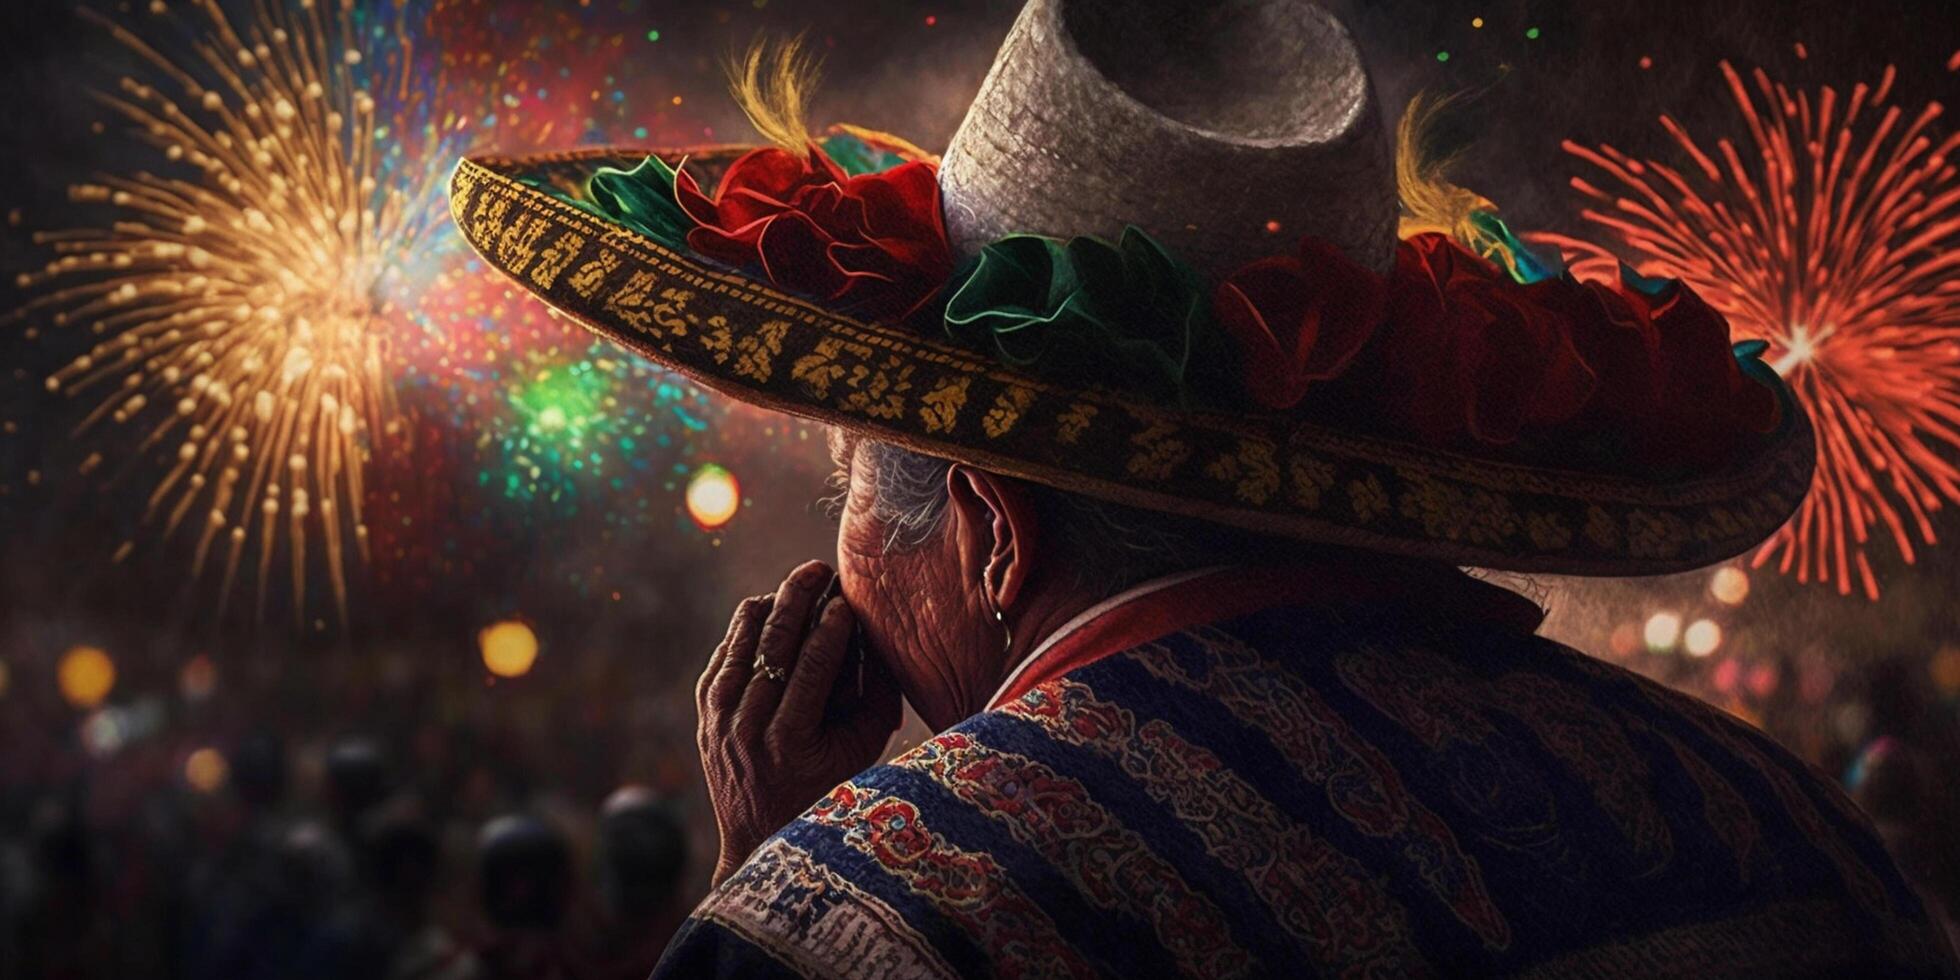 Celebrating New Year's with a Man in Traditional Mexican Clothing and a Mexican Hat photo